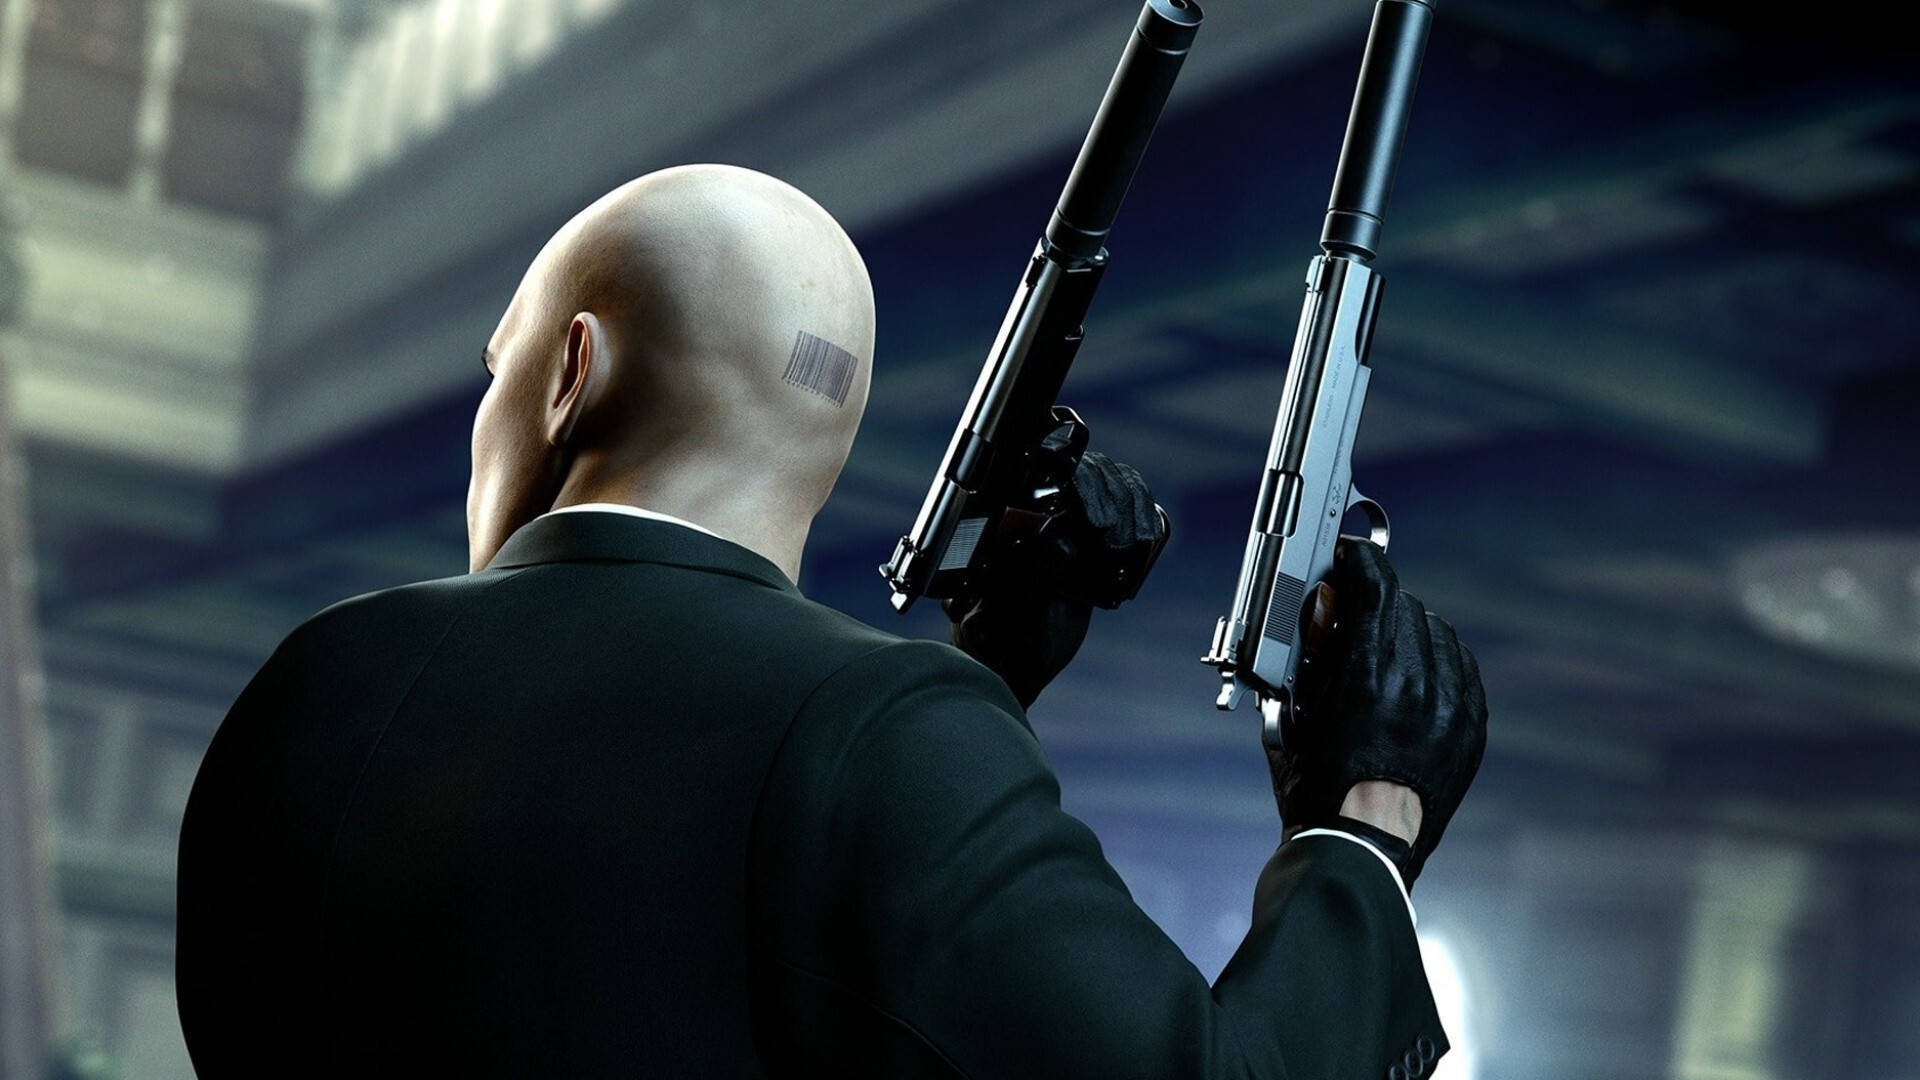 An experienced Hitman ready to complete any task Wallpaper